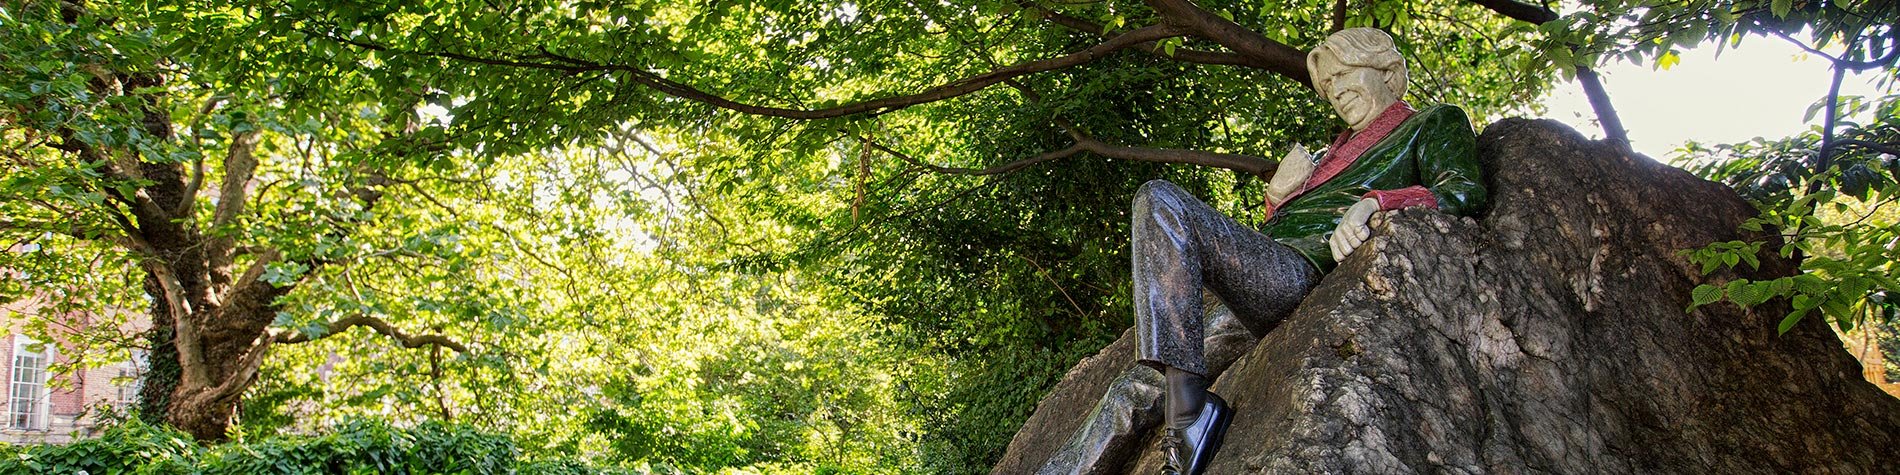 The Oscar Wilde Statue under the shadow of tall trees